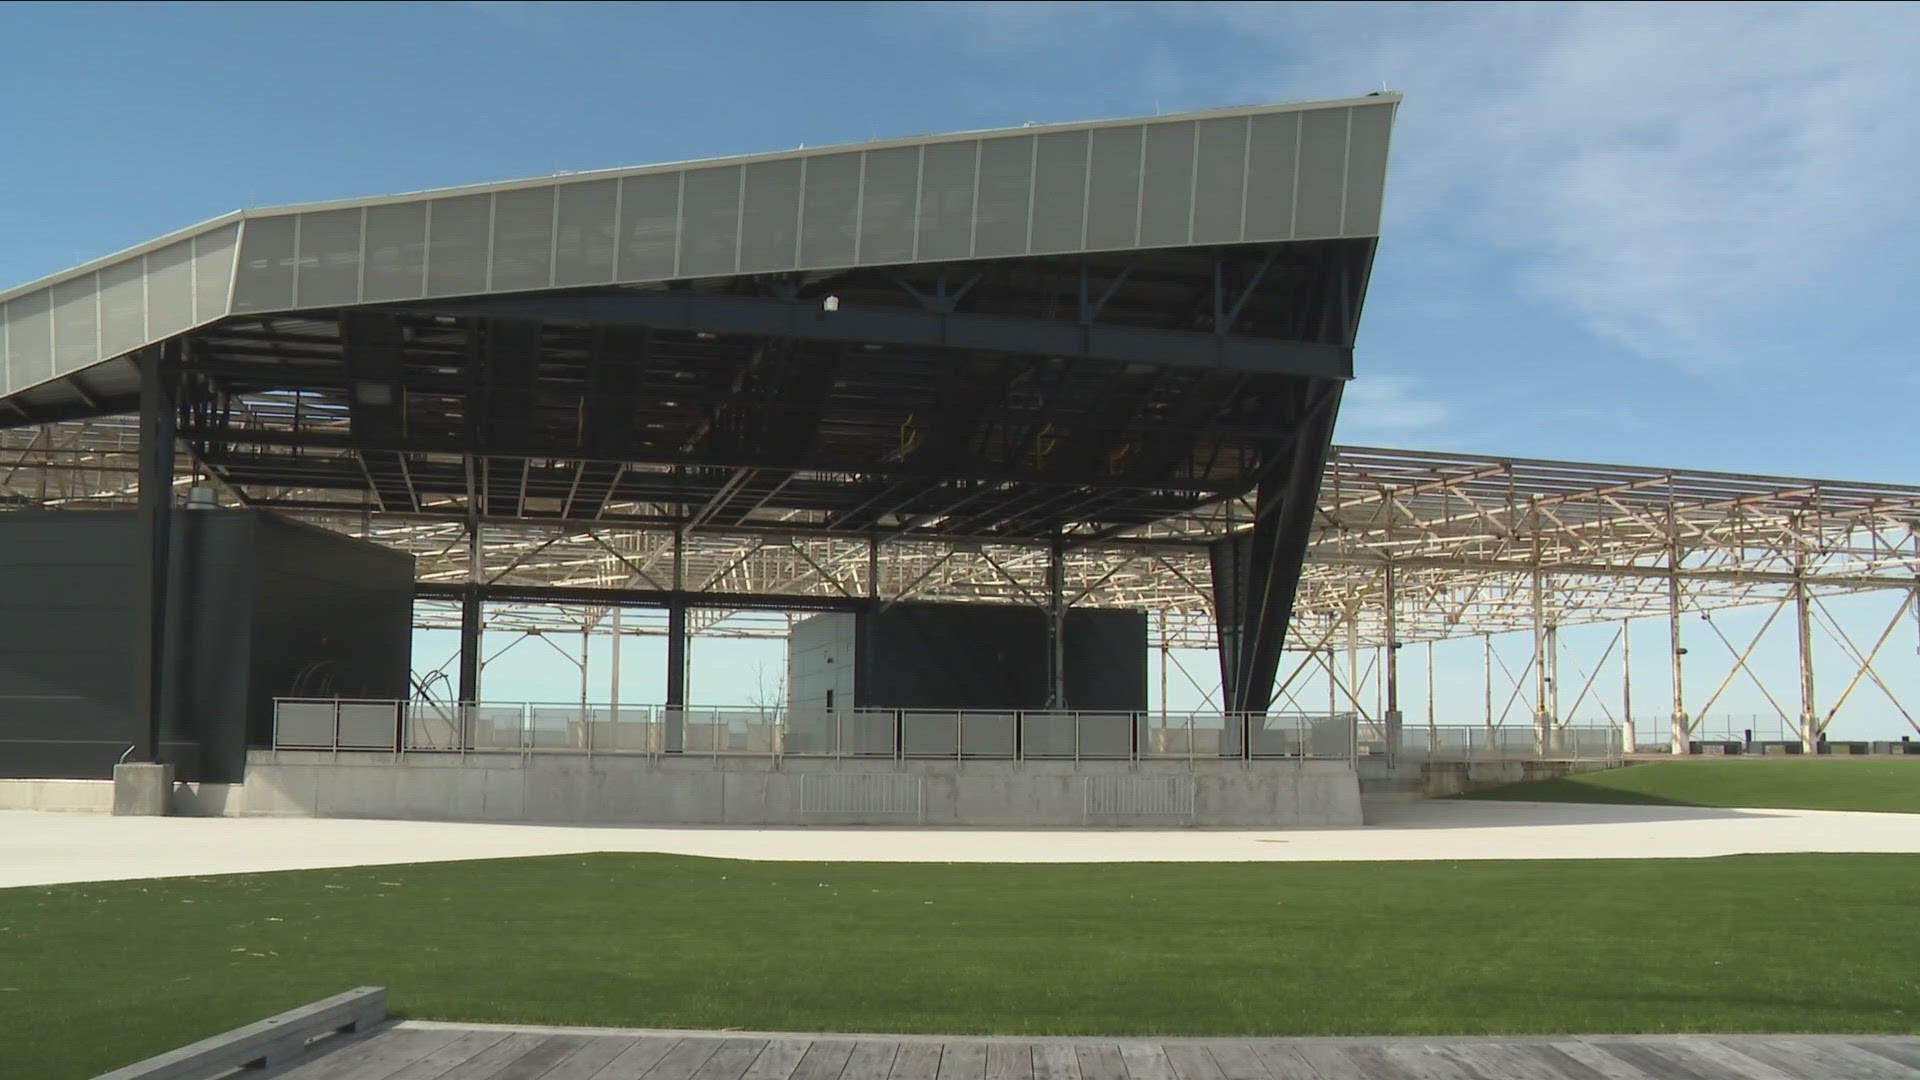 Terminal B Site: Unfinished work for state?